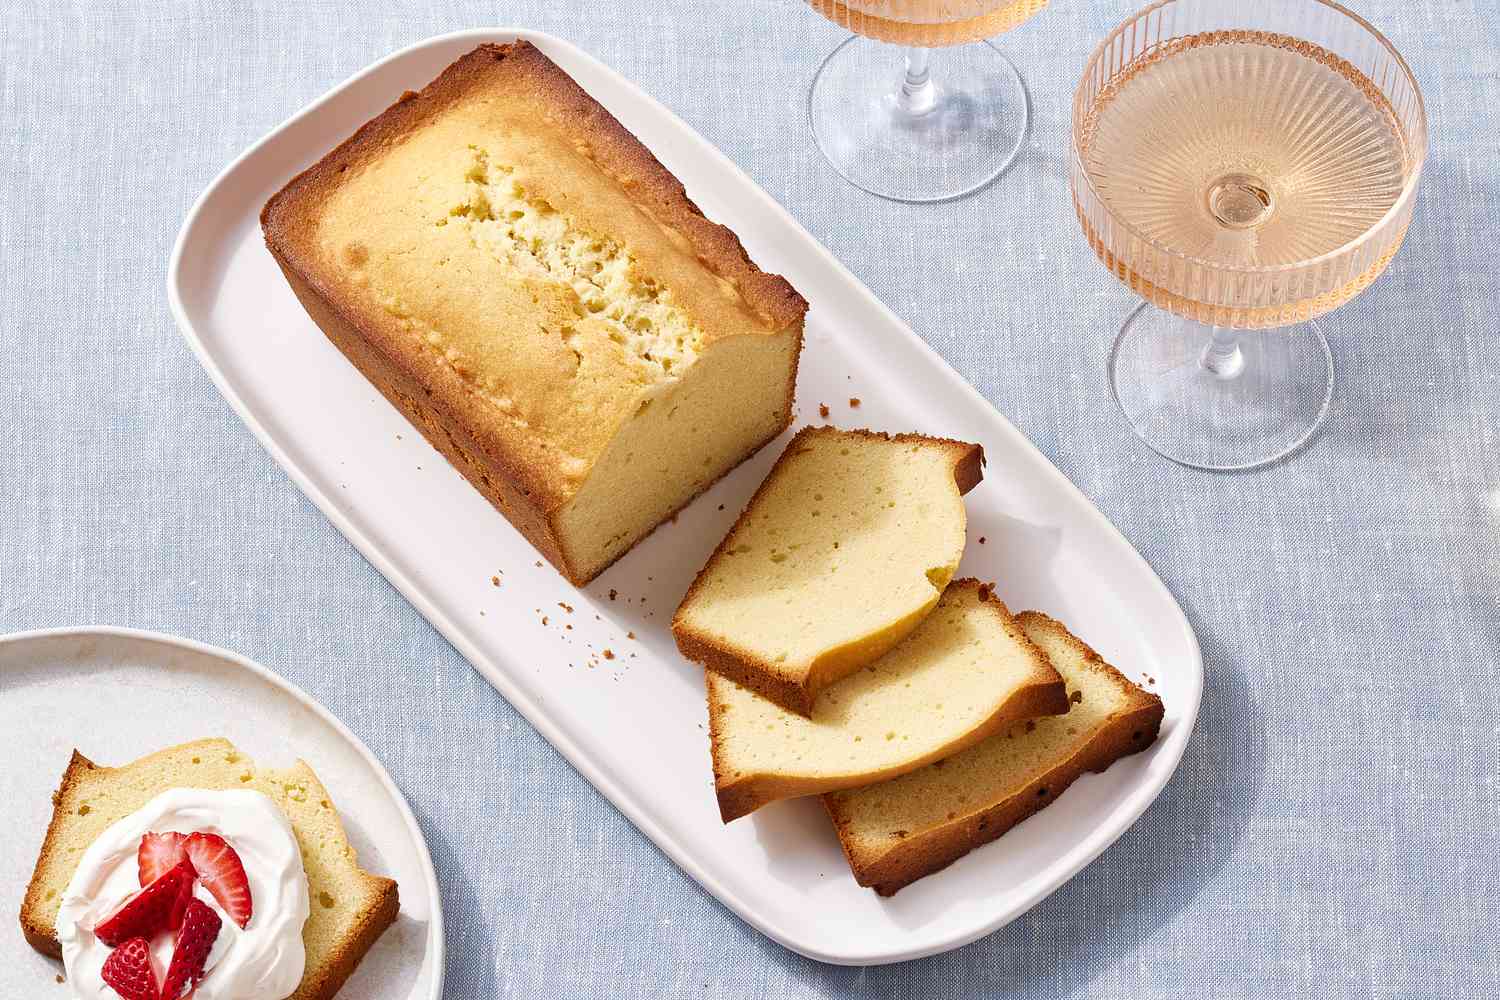 How To Store Pound Cake